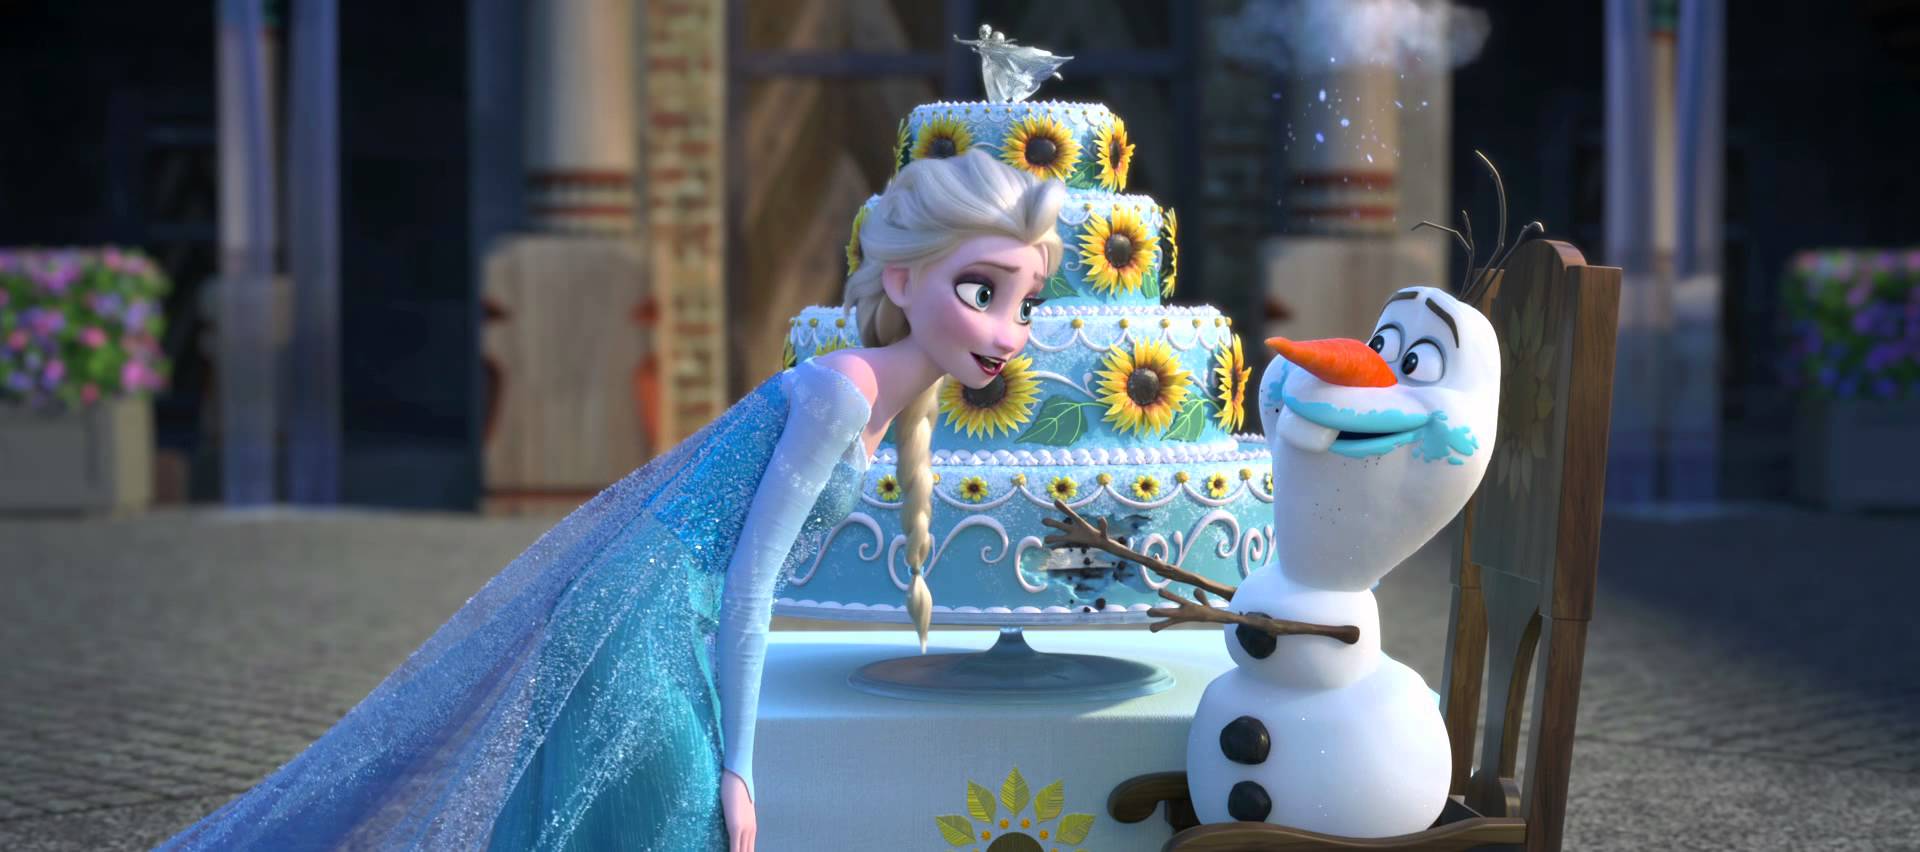 Frozen Fever Review